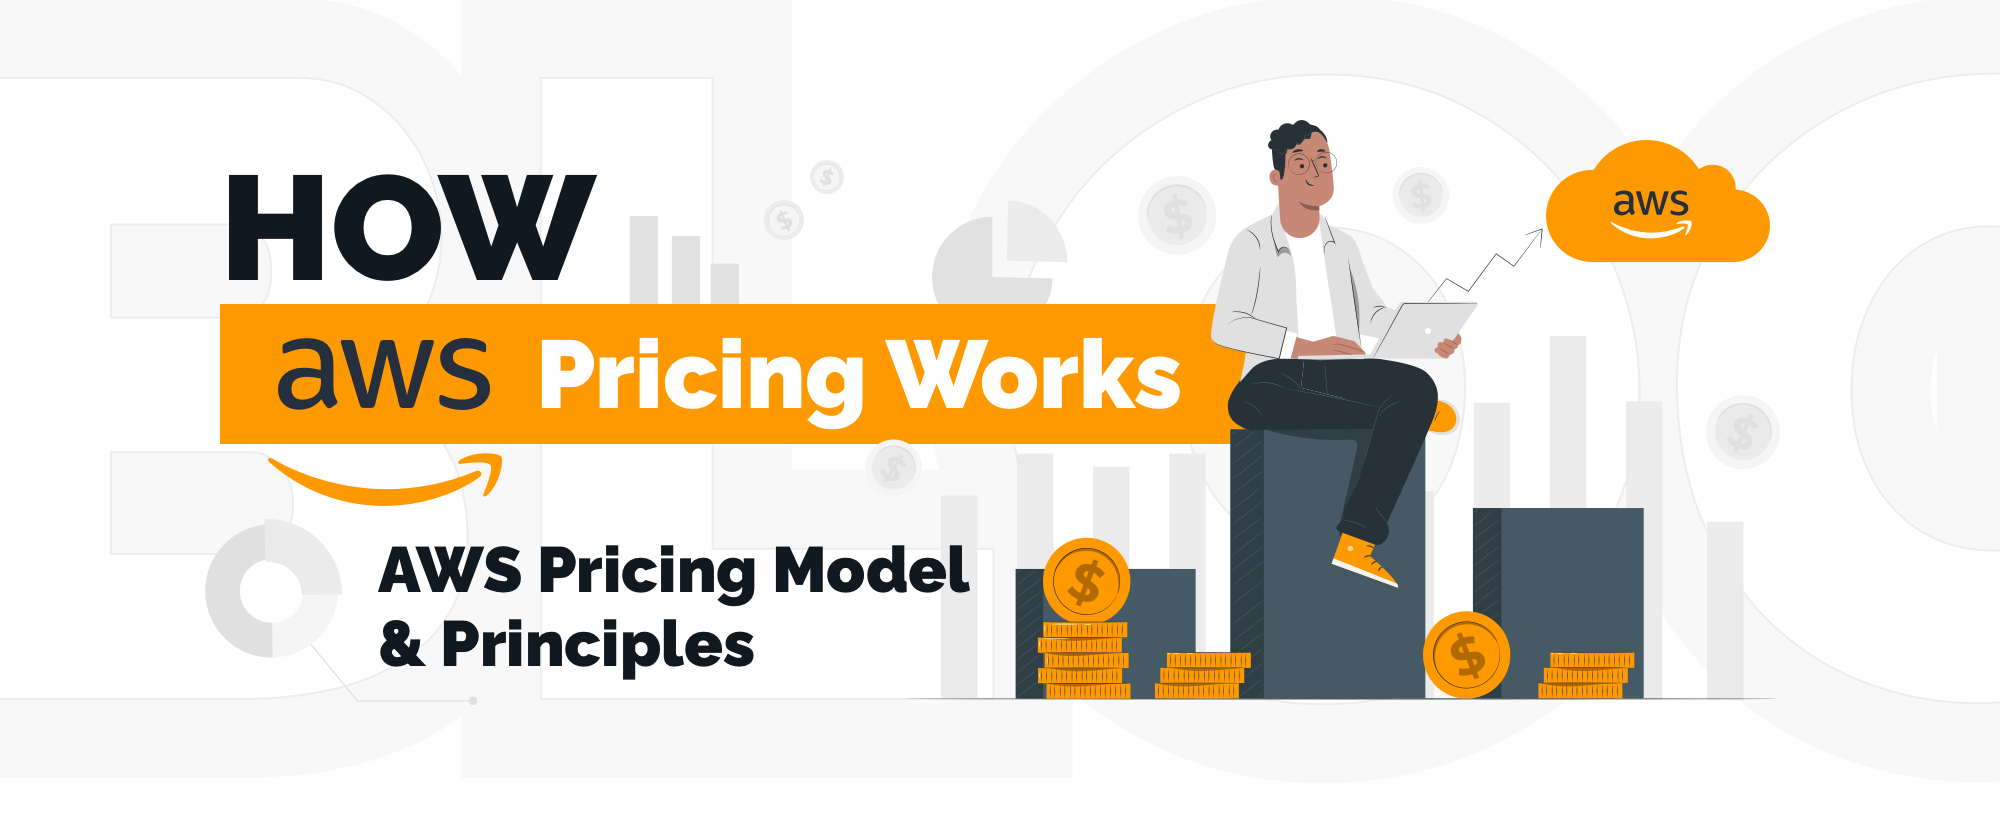 Understanding the AWS Pricing: Model, Principles, Overview